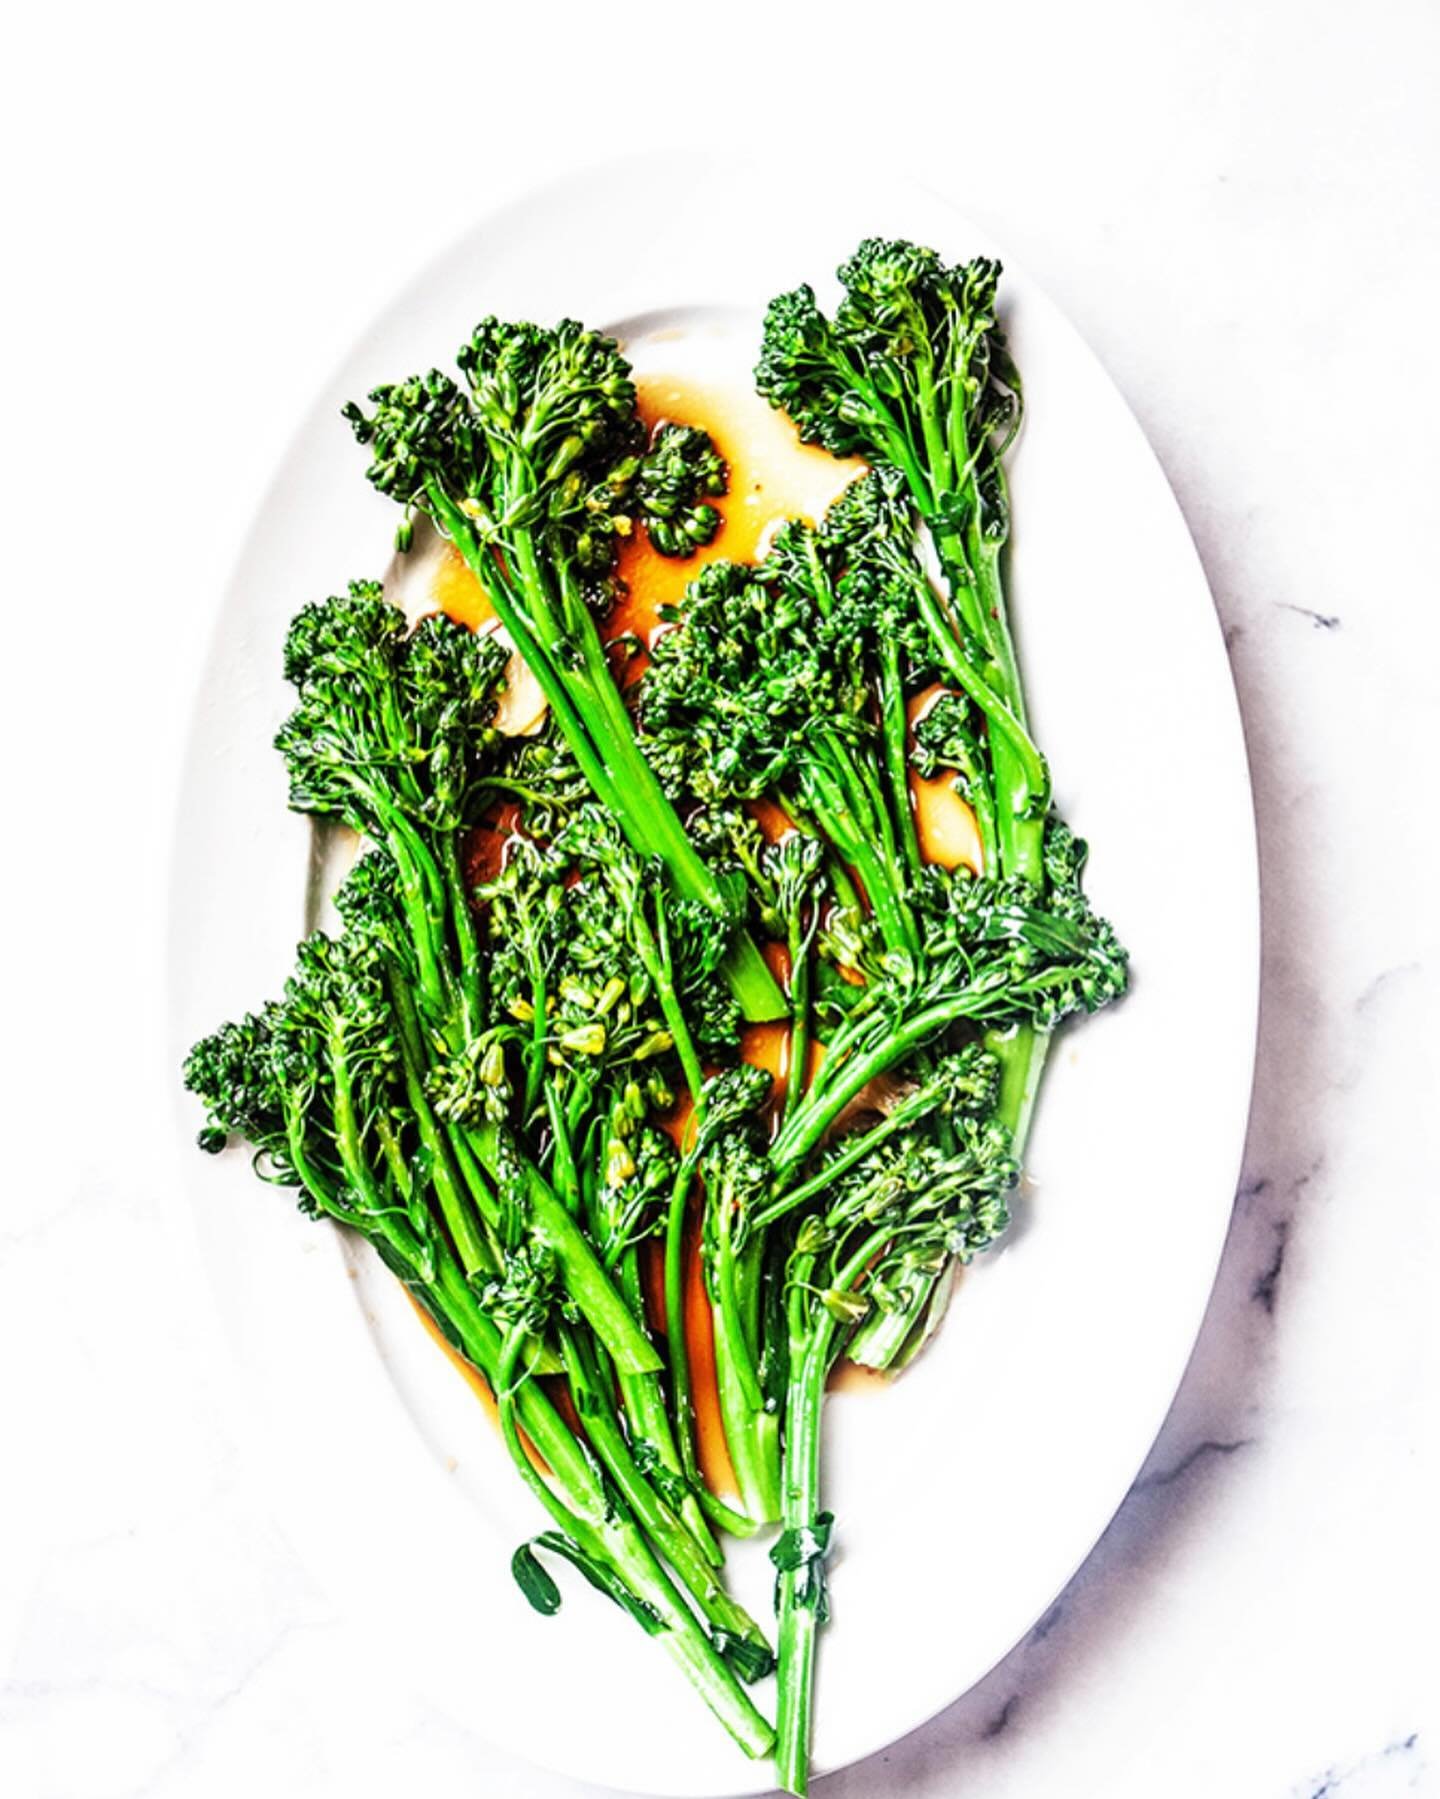 BEAUTIFUL FOOD BY DESIGN | NEW RECIPE | Green. Gently steamed broccolini is bathed in peppery garlic olive oil and finished with Tamari Sauce&ndash;another Bijouxs Basics, Beautiful Food by Design.

TAP BIO FOR RECIPE 
https://bijouxs.com/bijouxs-bas